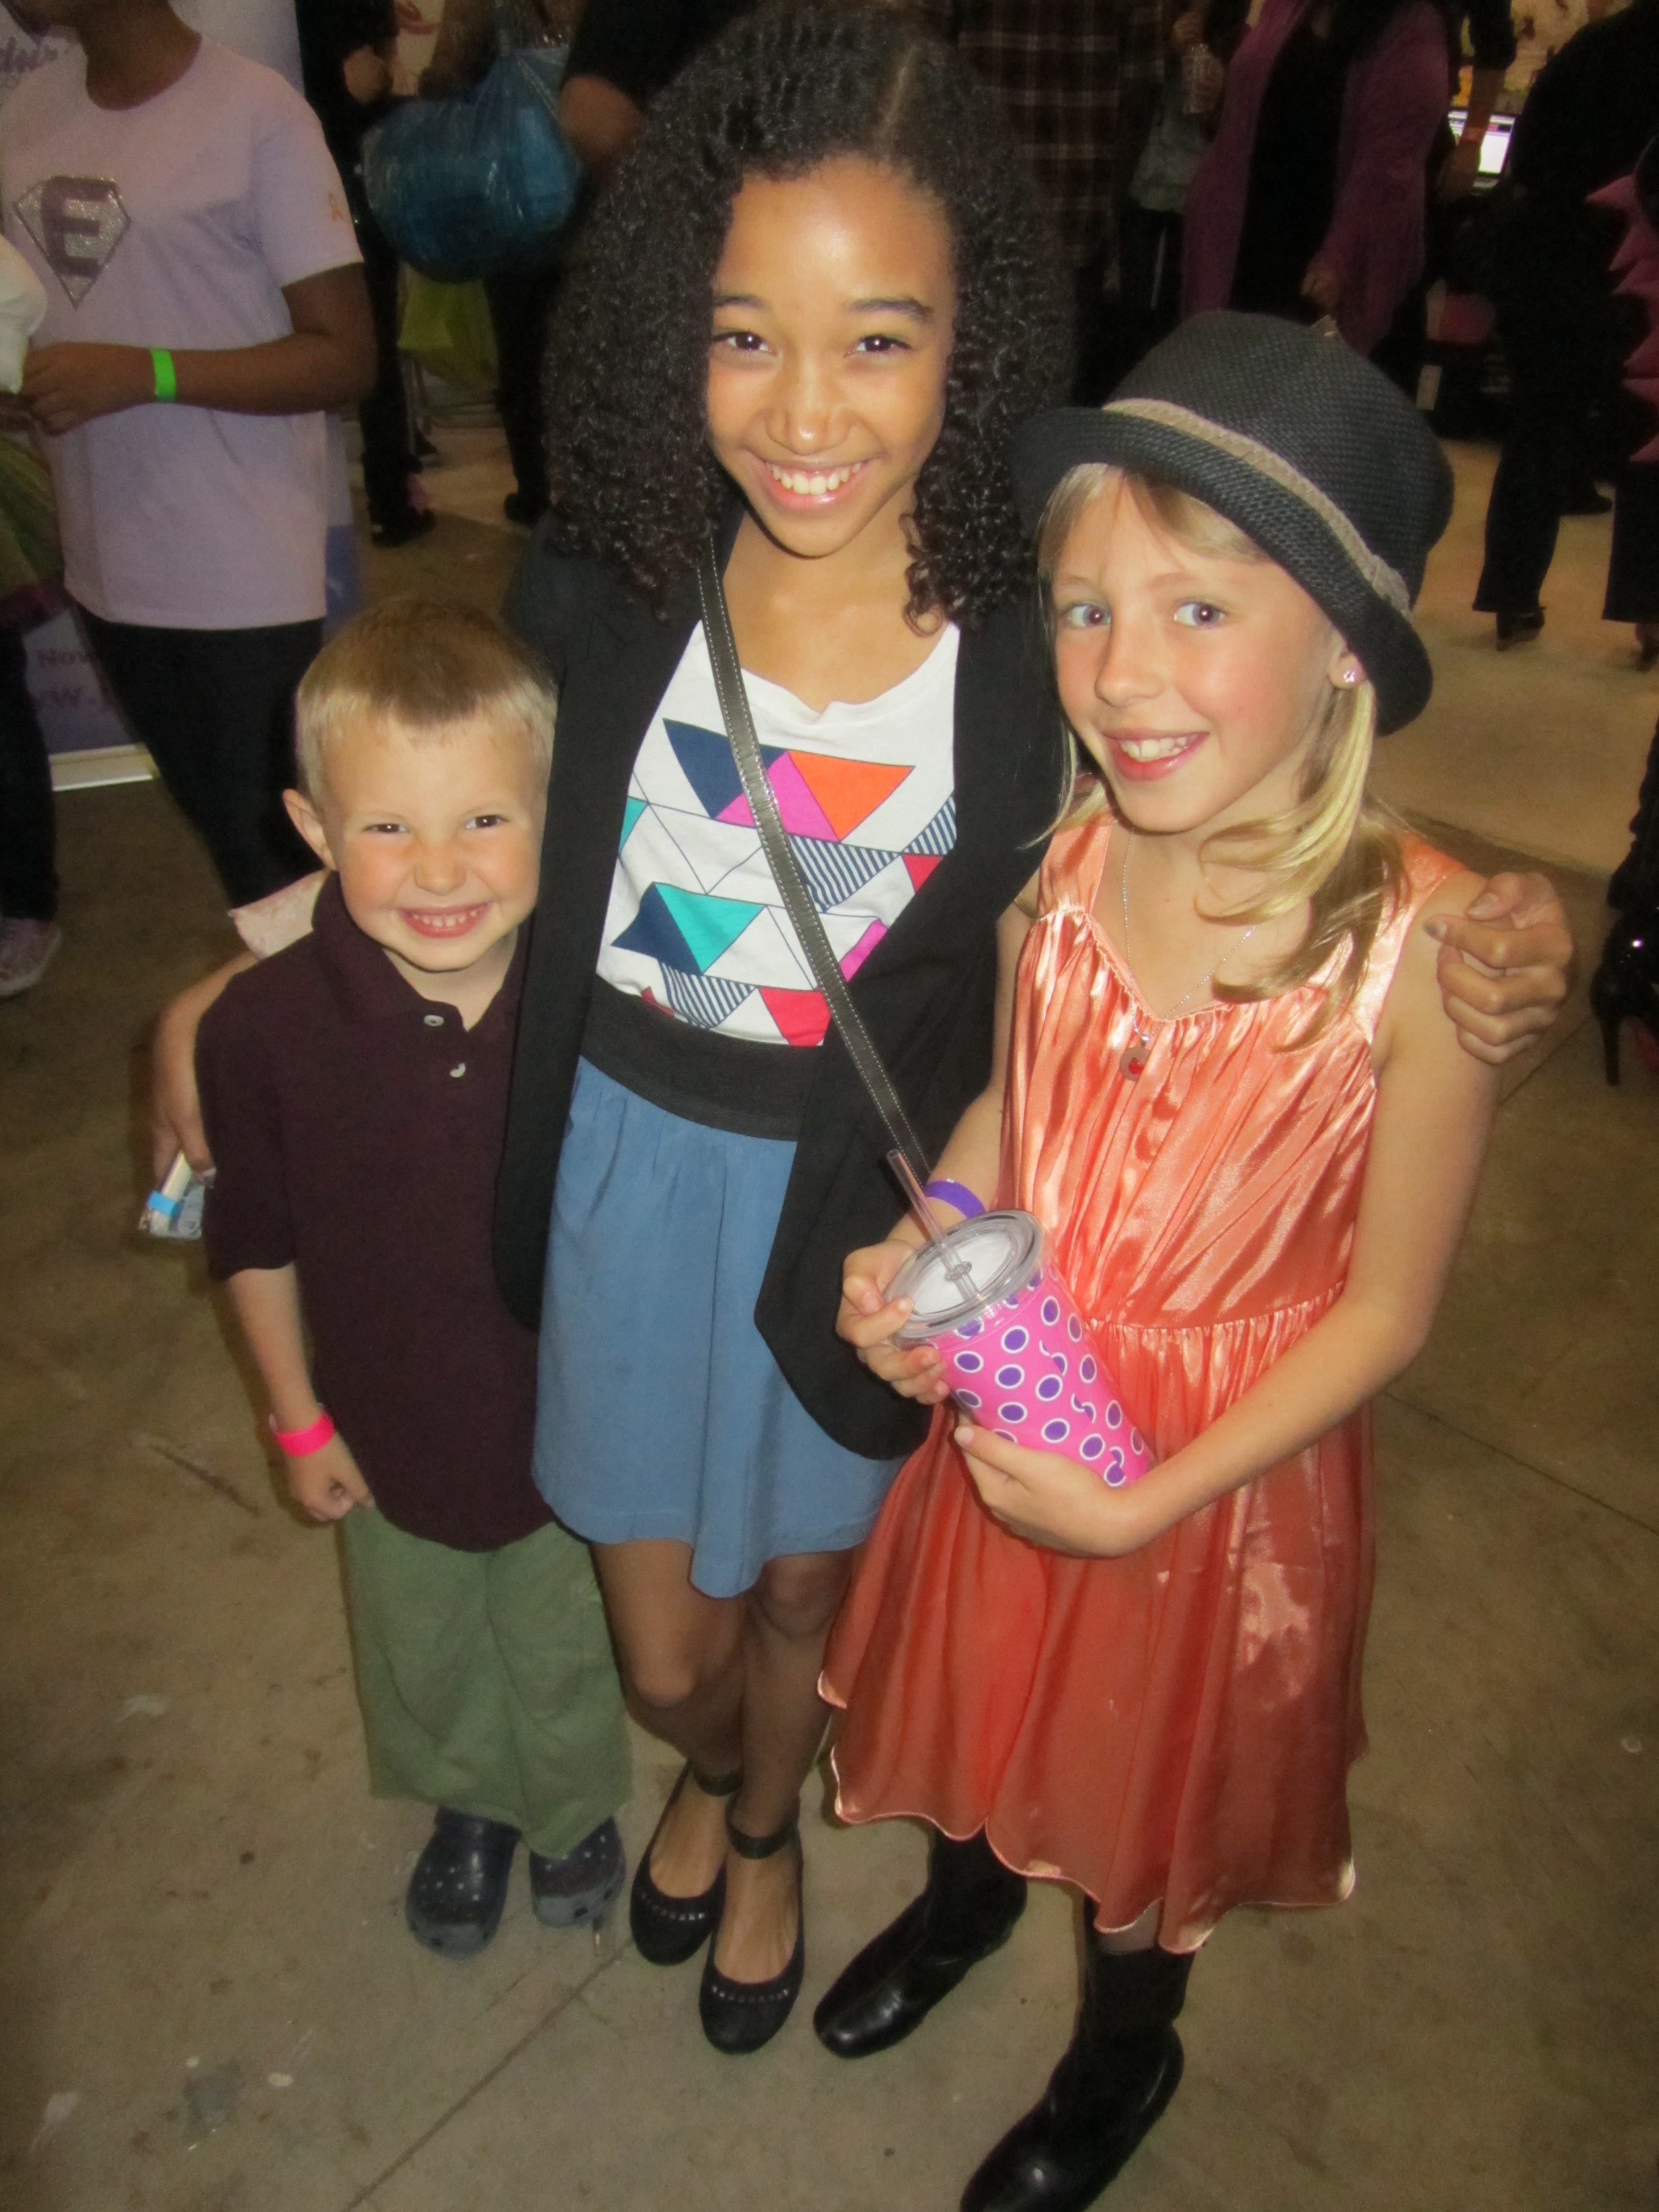 Hazel and Angus Sepenuk with Amandla Stenberg (THE HUNGER GAMES) at the Nickelodeon Kids Choice Awards Celebrity Gifting Suite